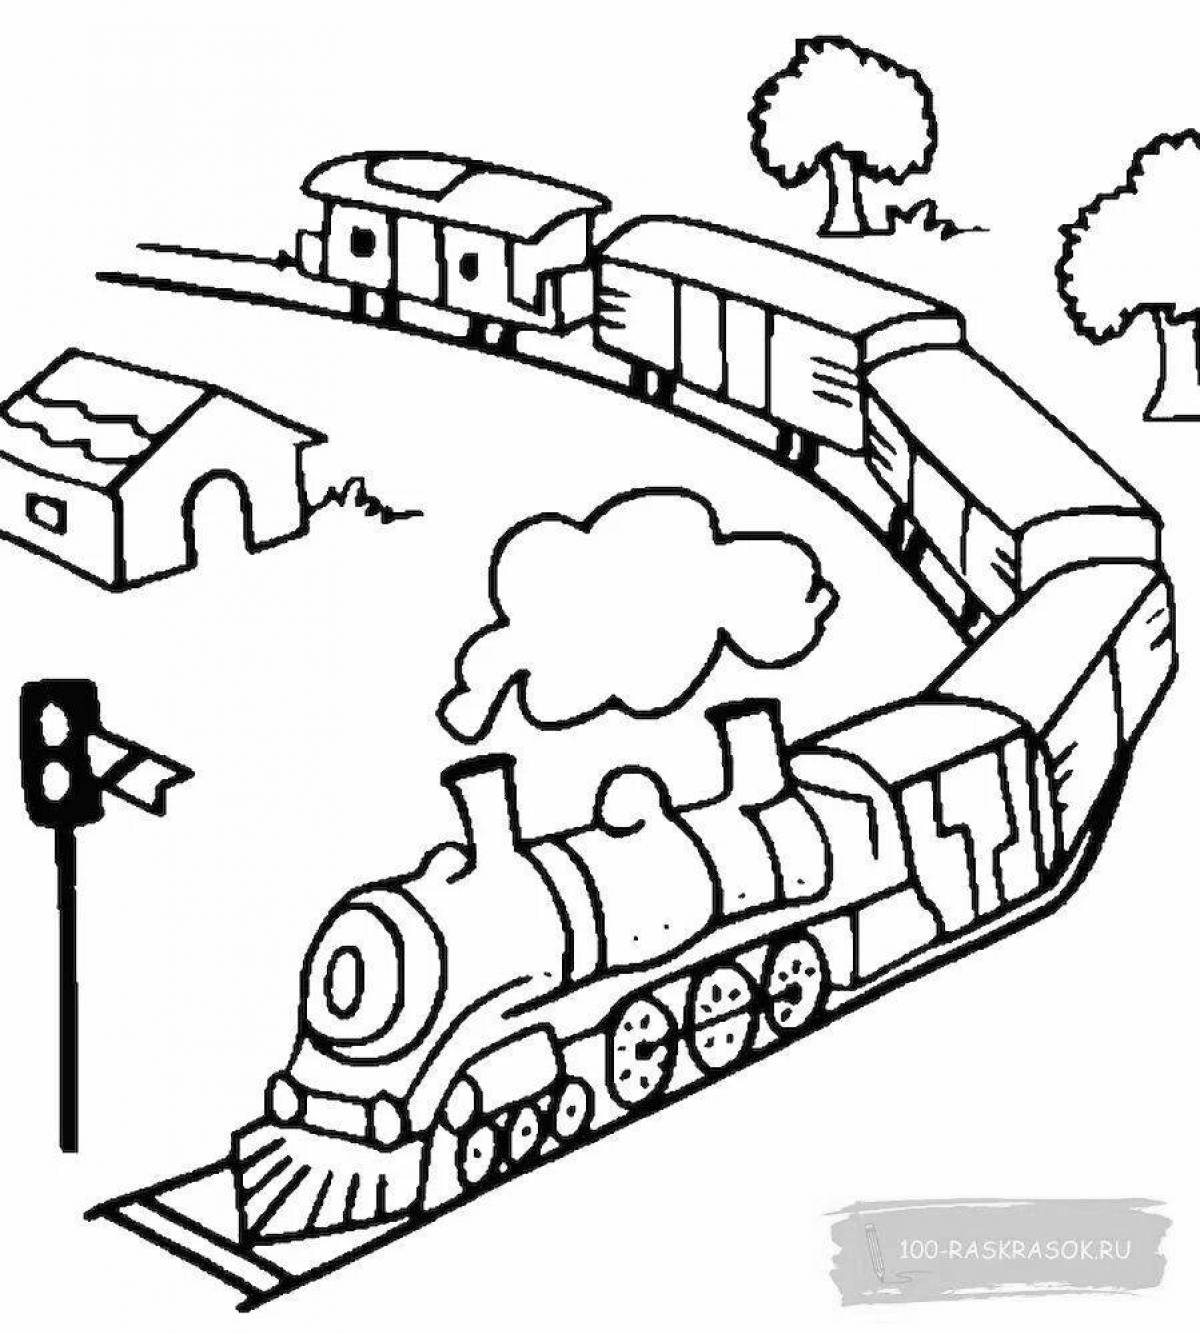 Incredible rail transport coloring pages for kids